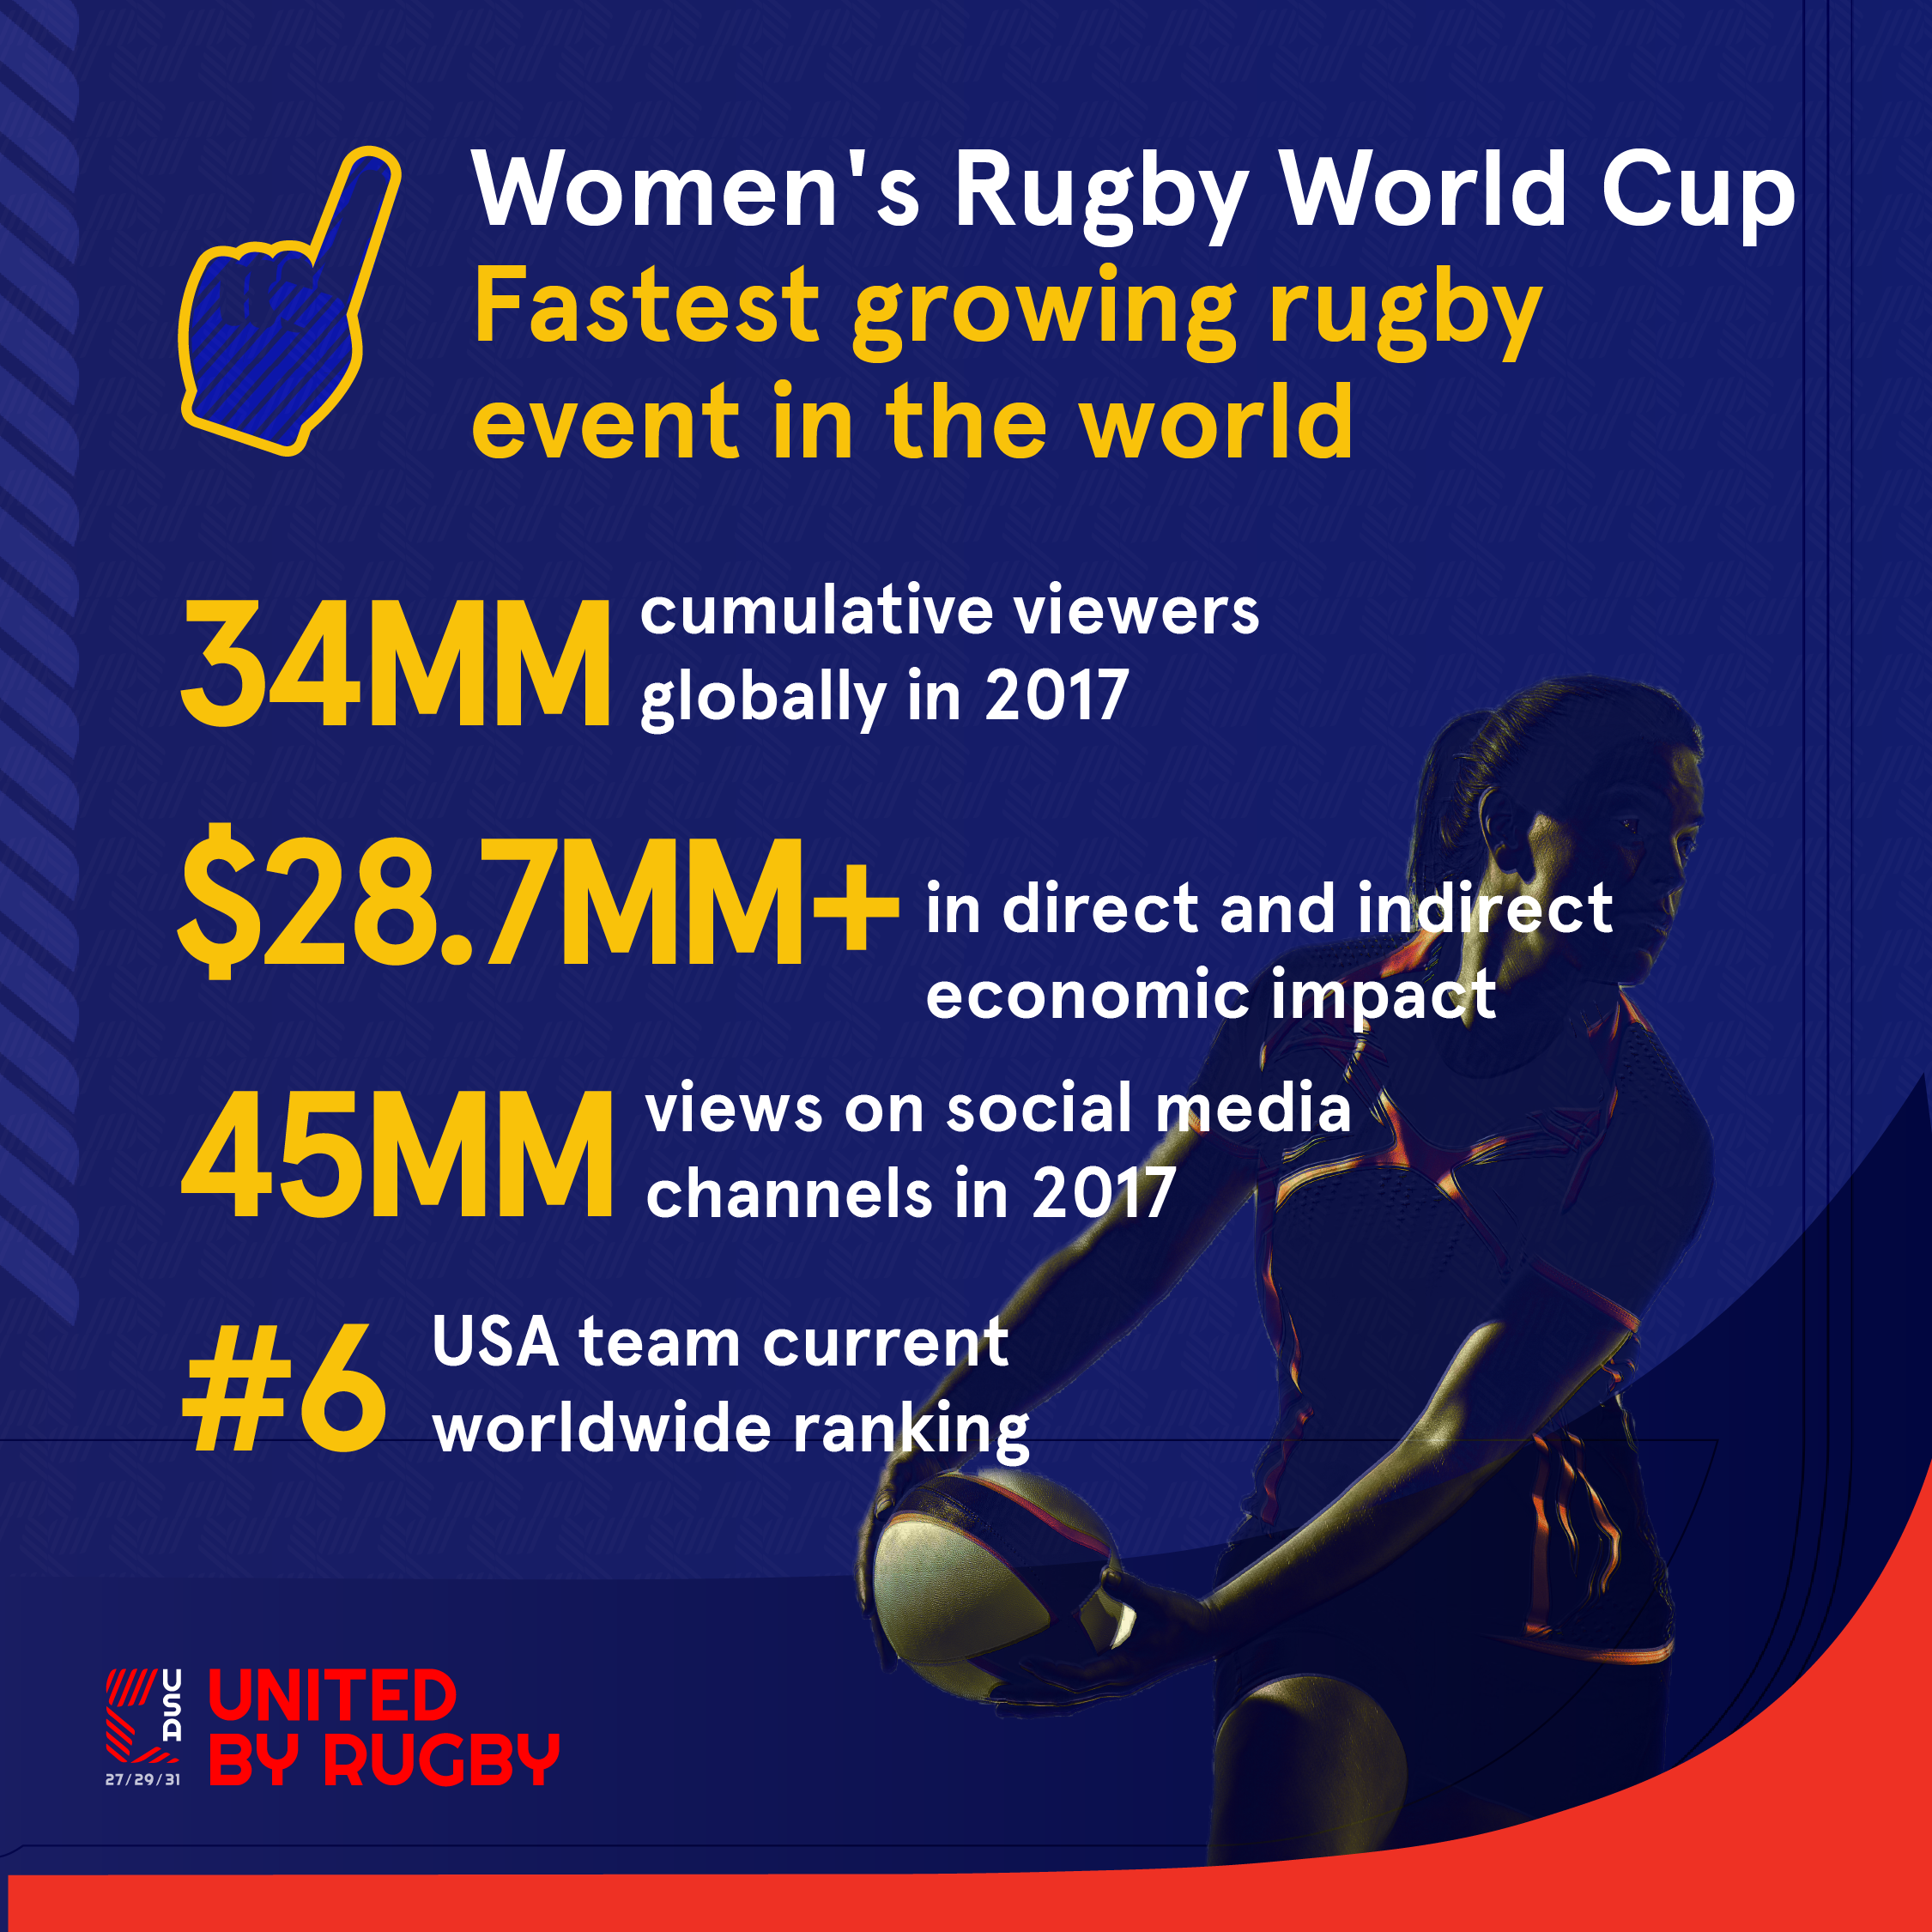 Women’s Rugby World Cup The Fastest Growing Rugby Event in the World